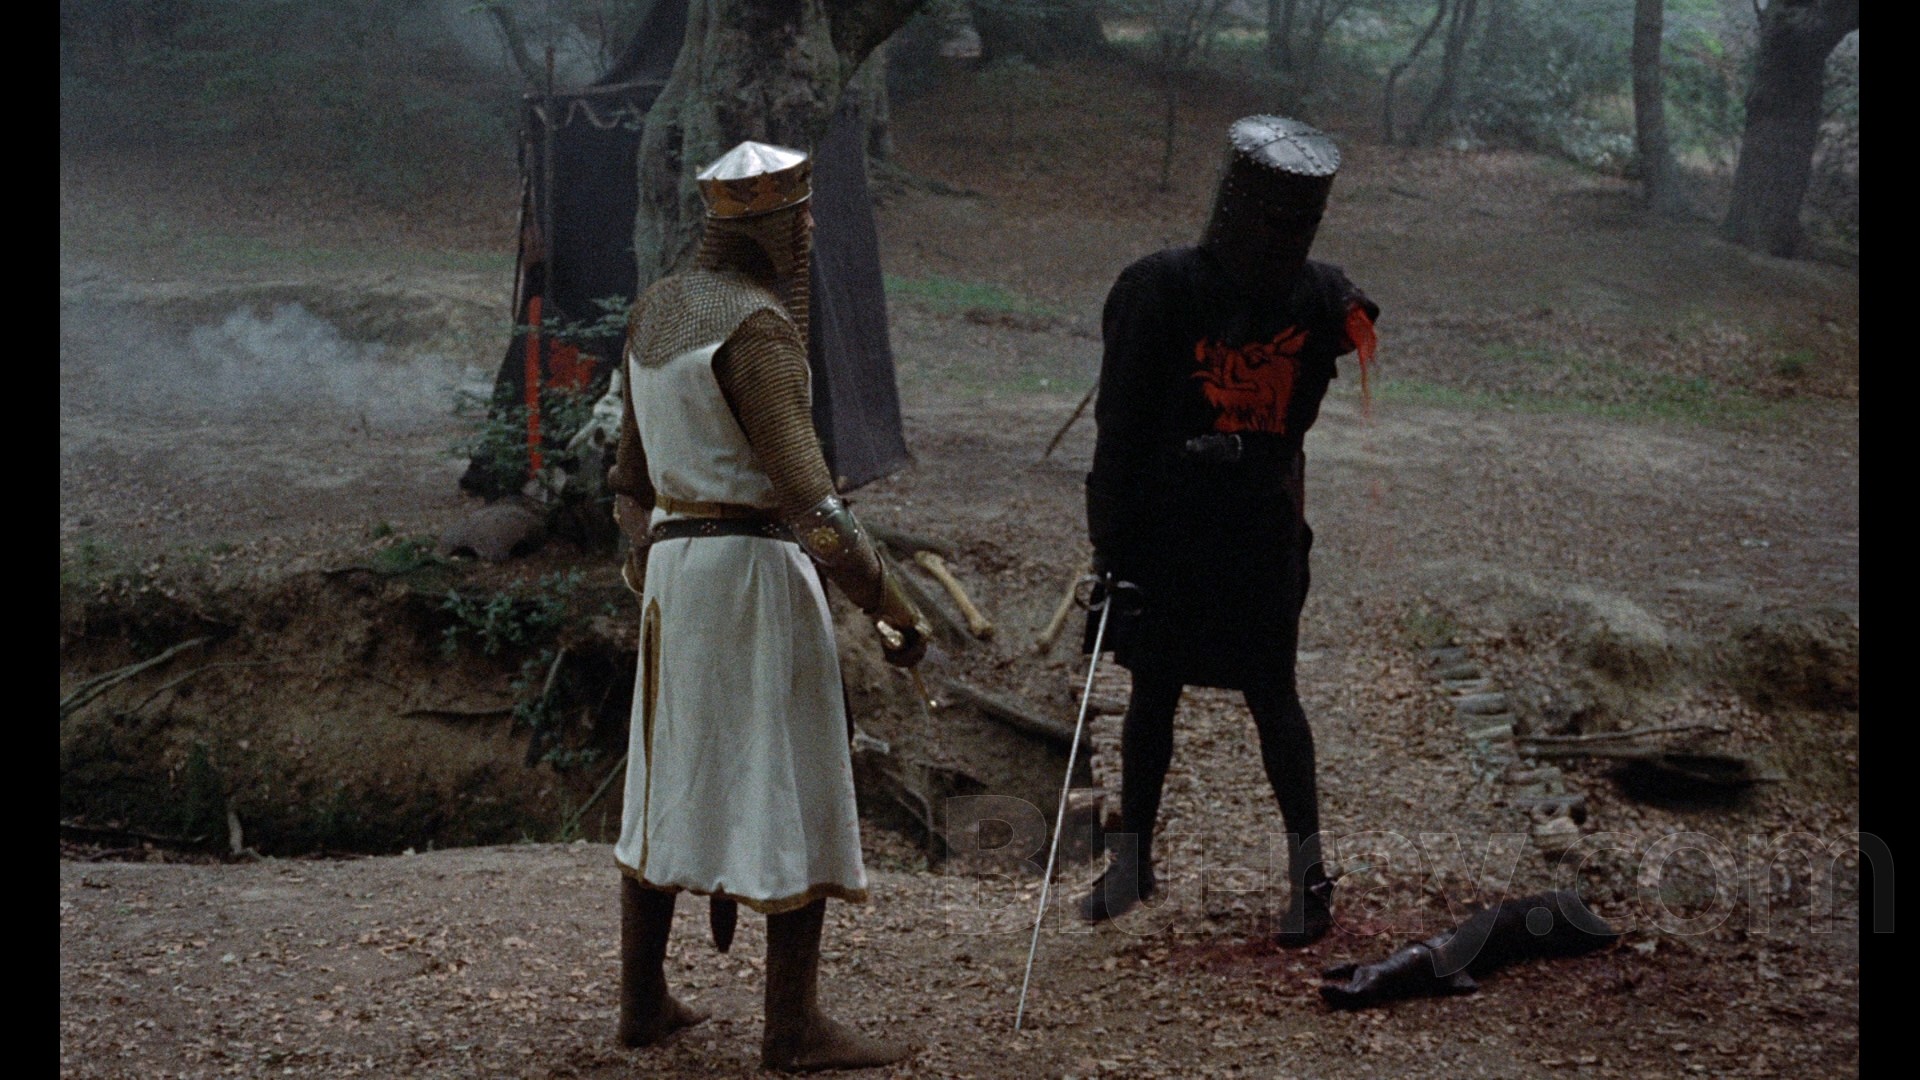 1920x1080 Monty Python and the Holy Grail - Page 3 - AVS Forum | Home Theater  Discussions And Reviews